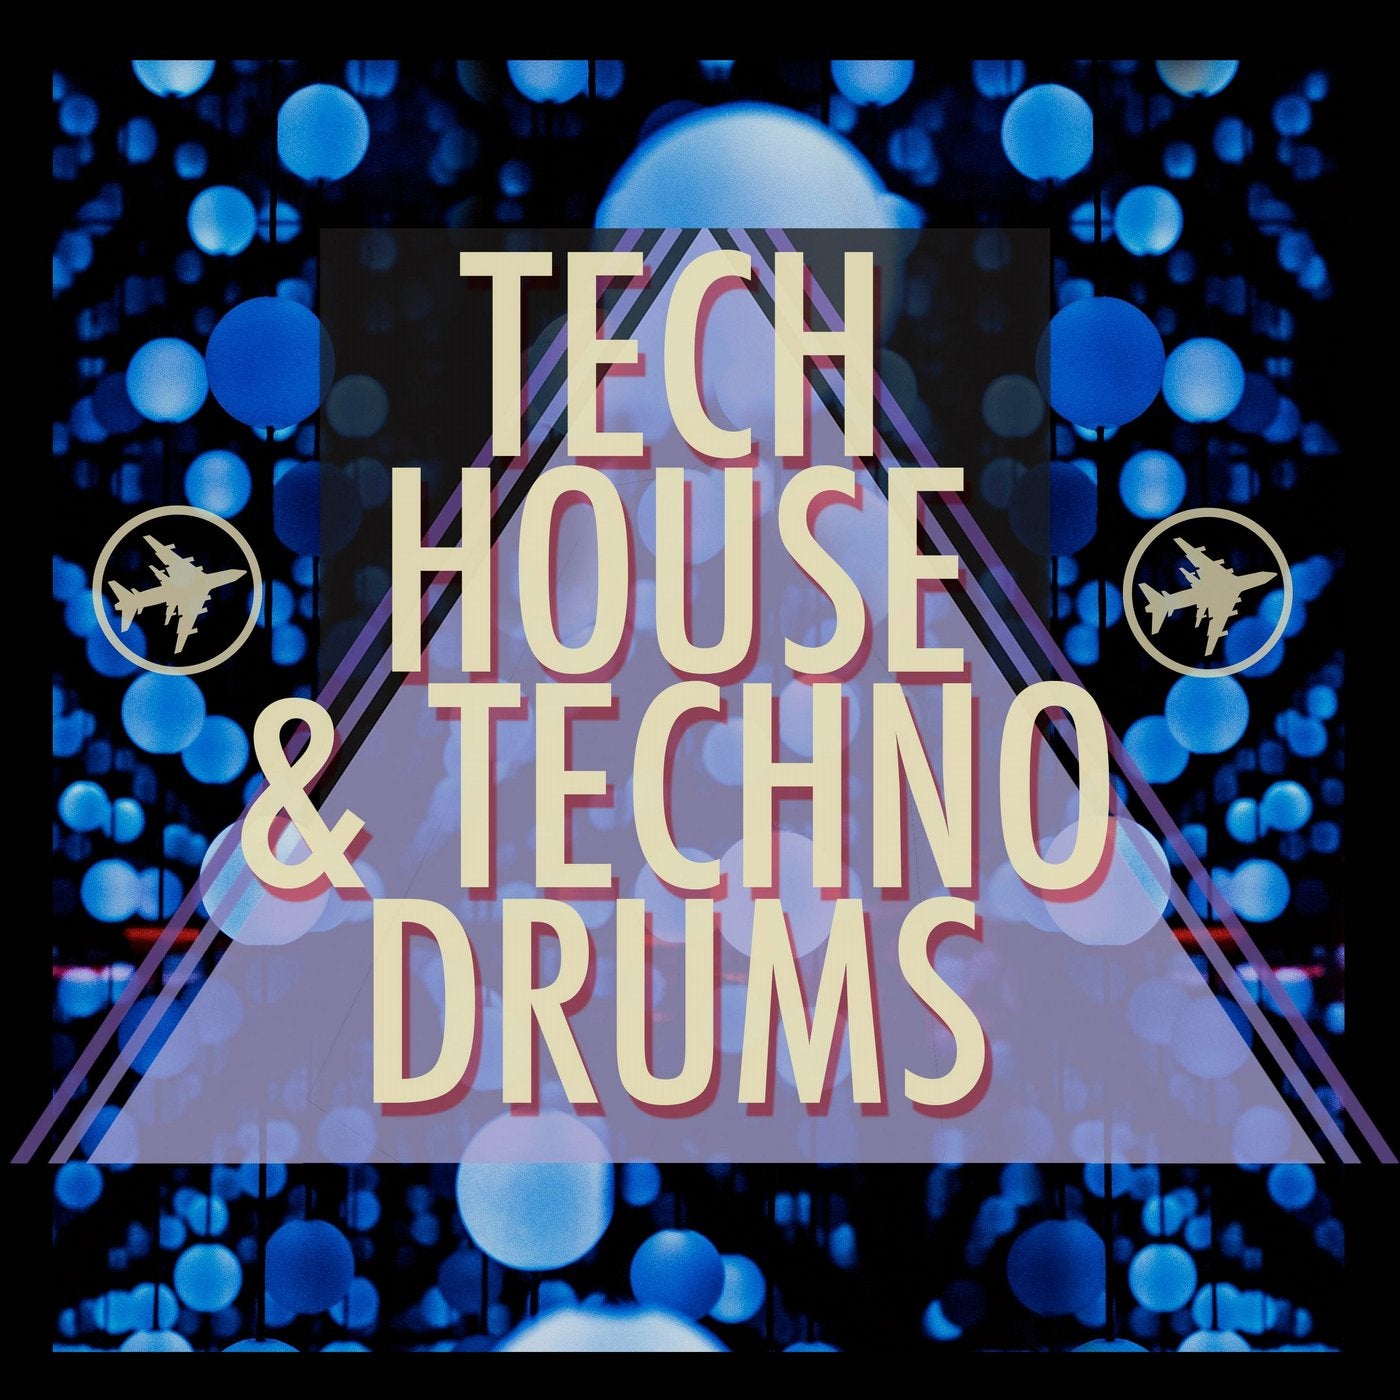 Tech House & Techno Drums